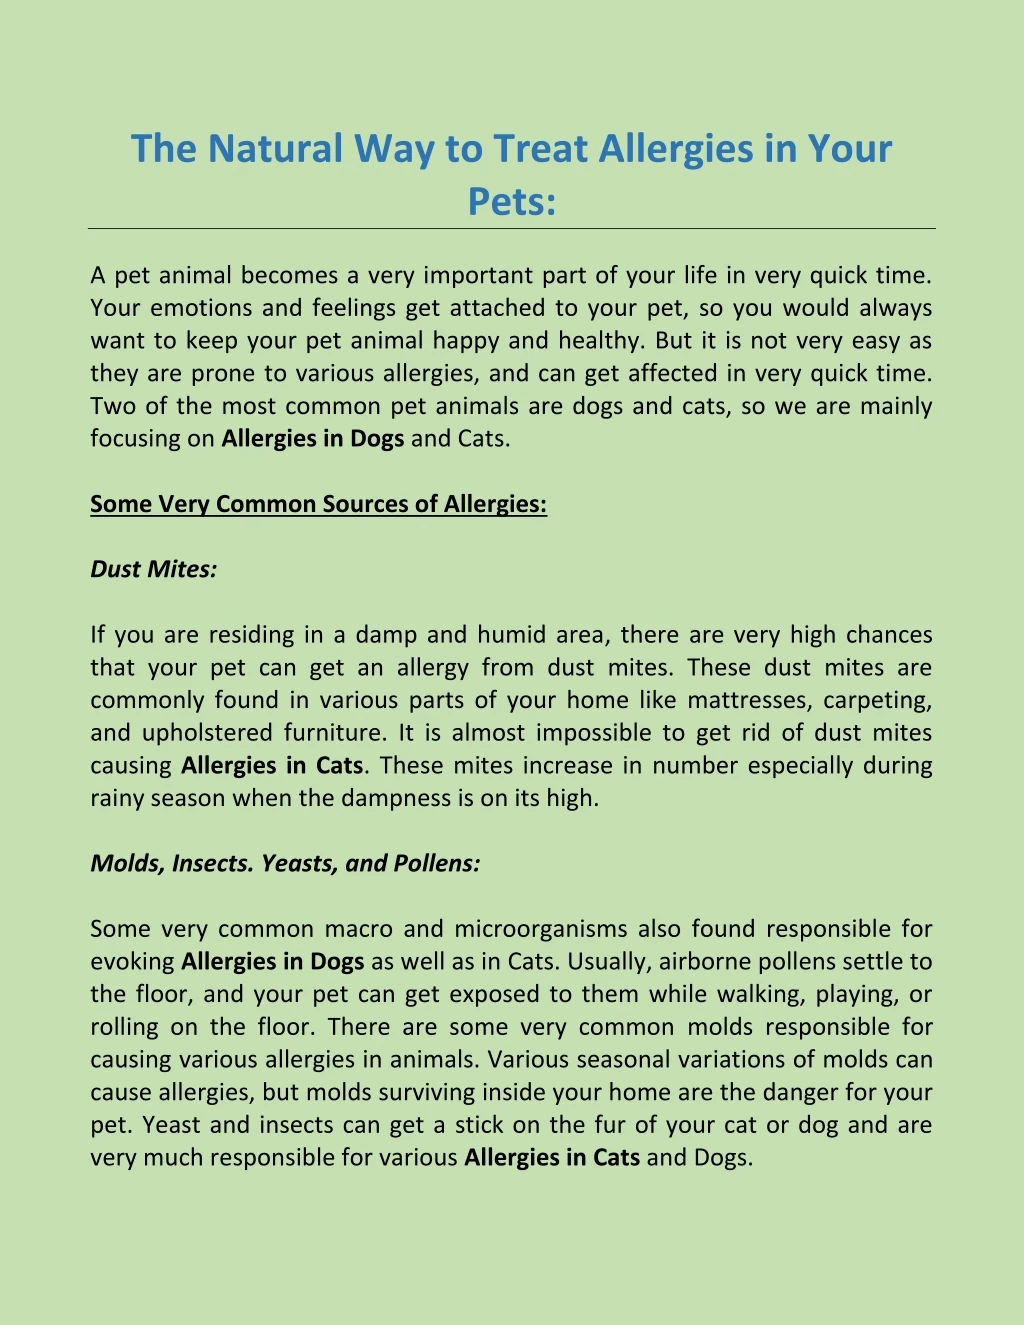 the natural way to treat allergies in your pets